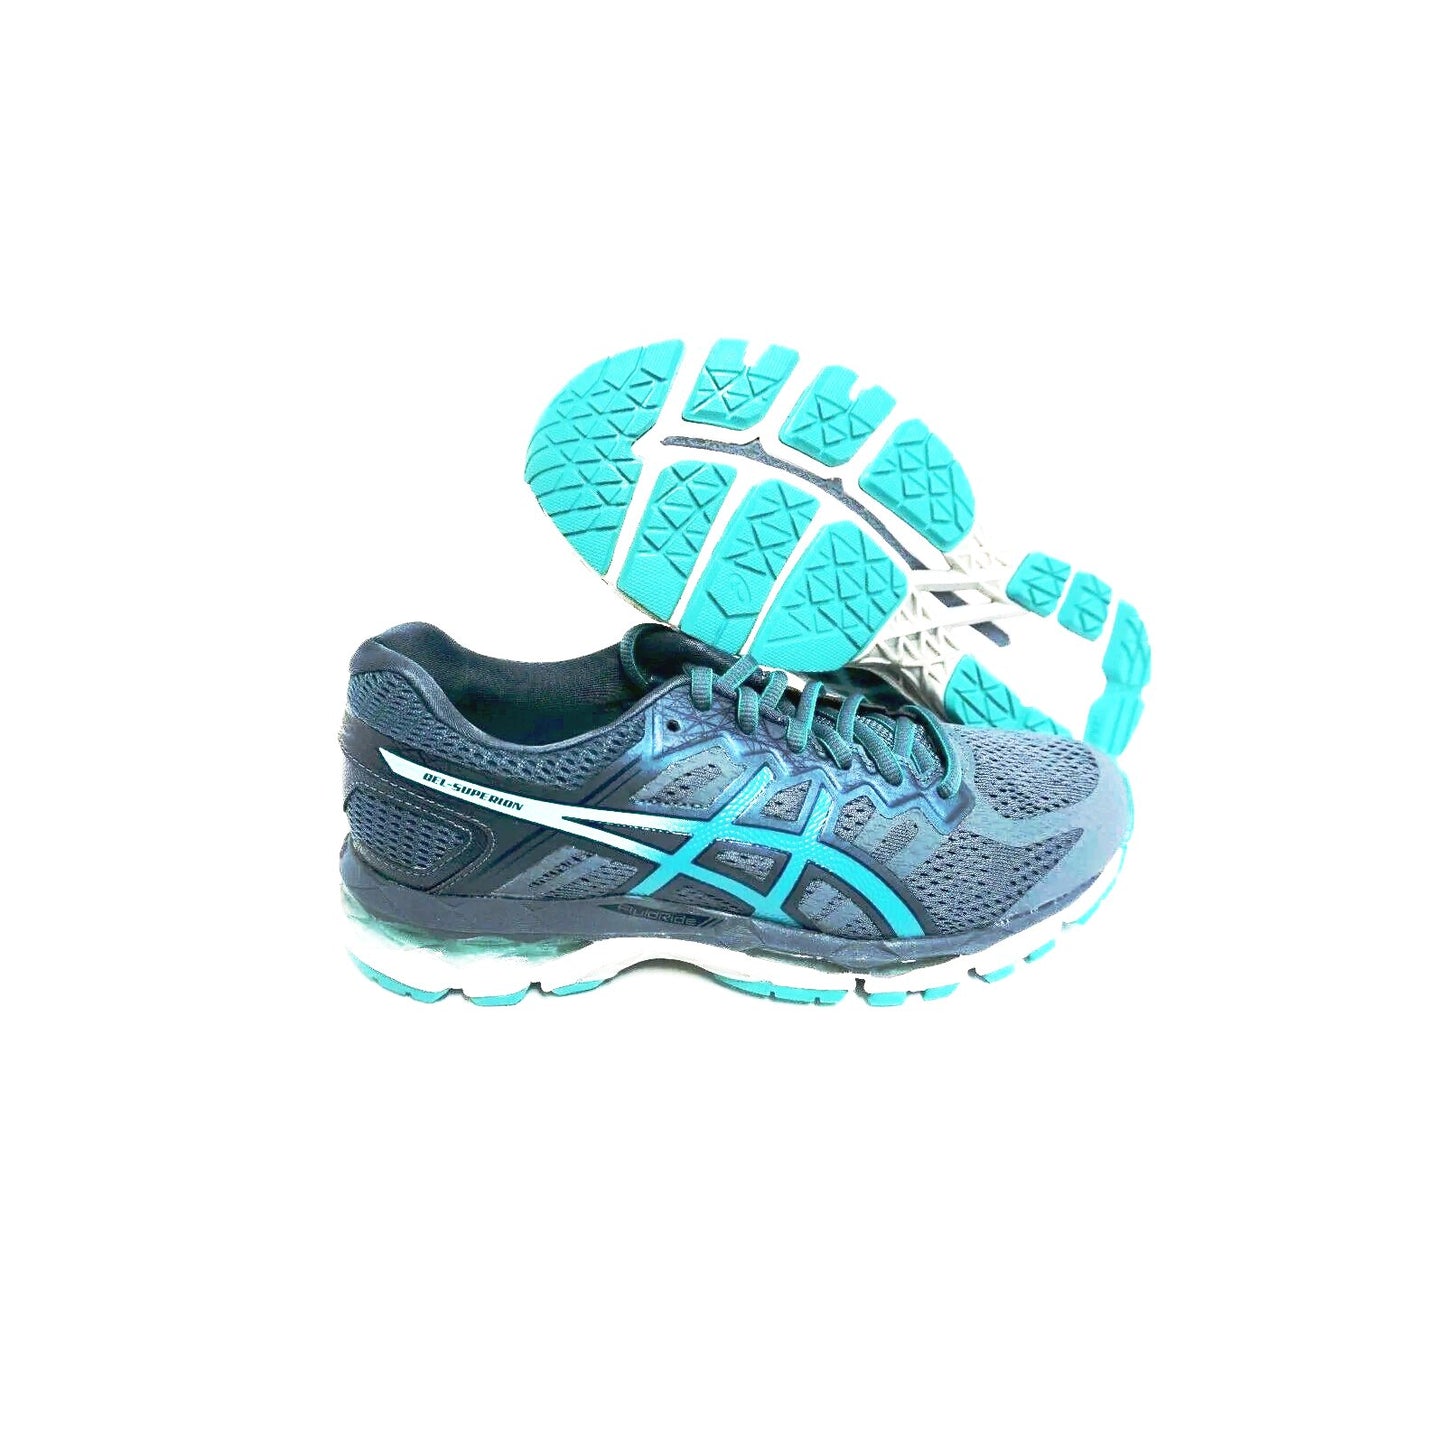 Asics women's gel-superion smoke blue running shoes size 8 us new